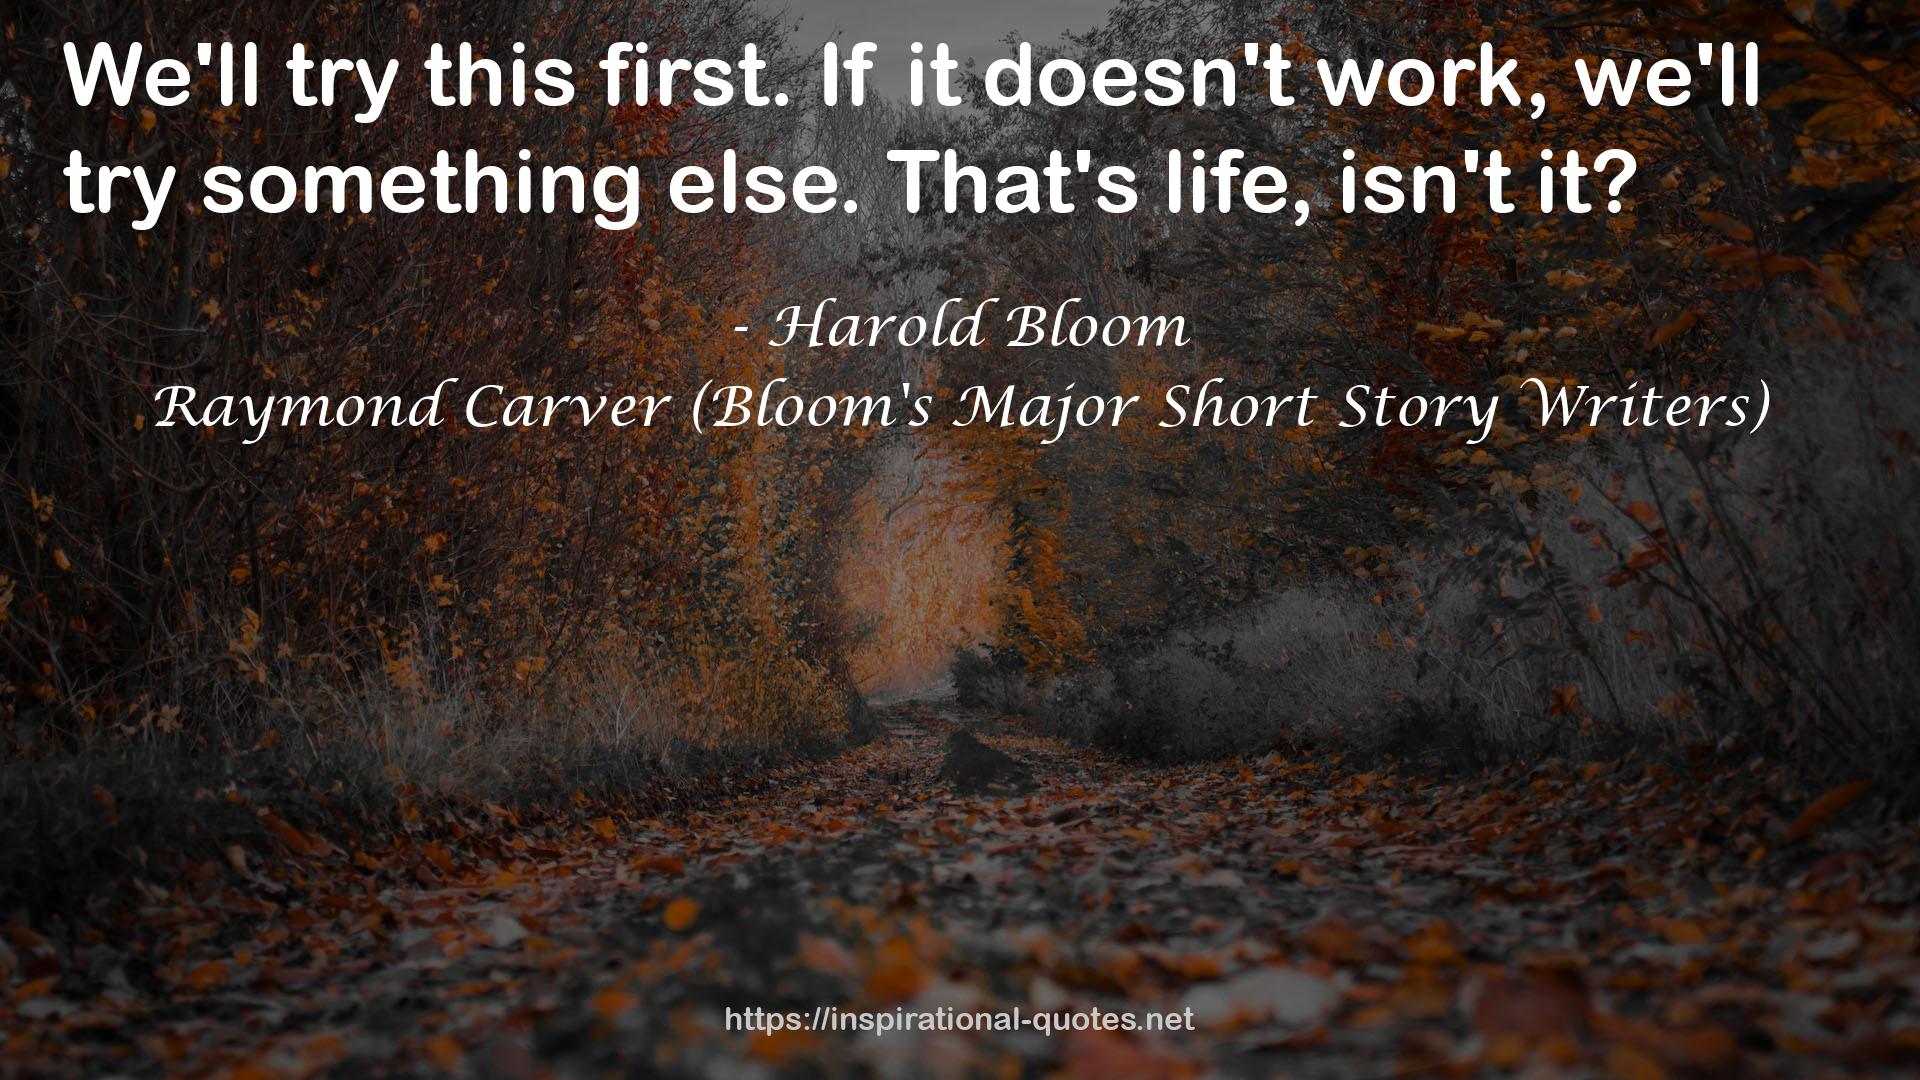 Raymond Carver (Bloom's Major Short Story Writers) QUOTES